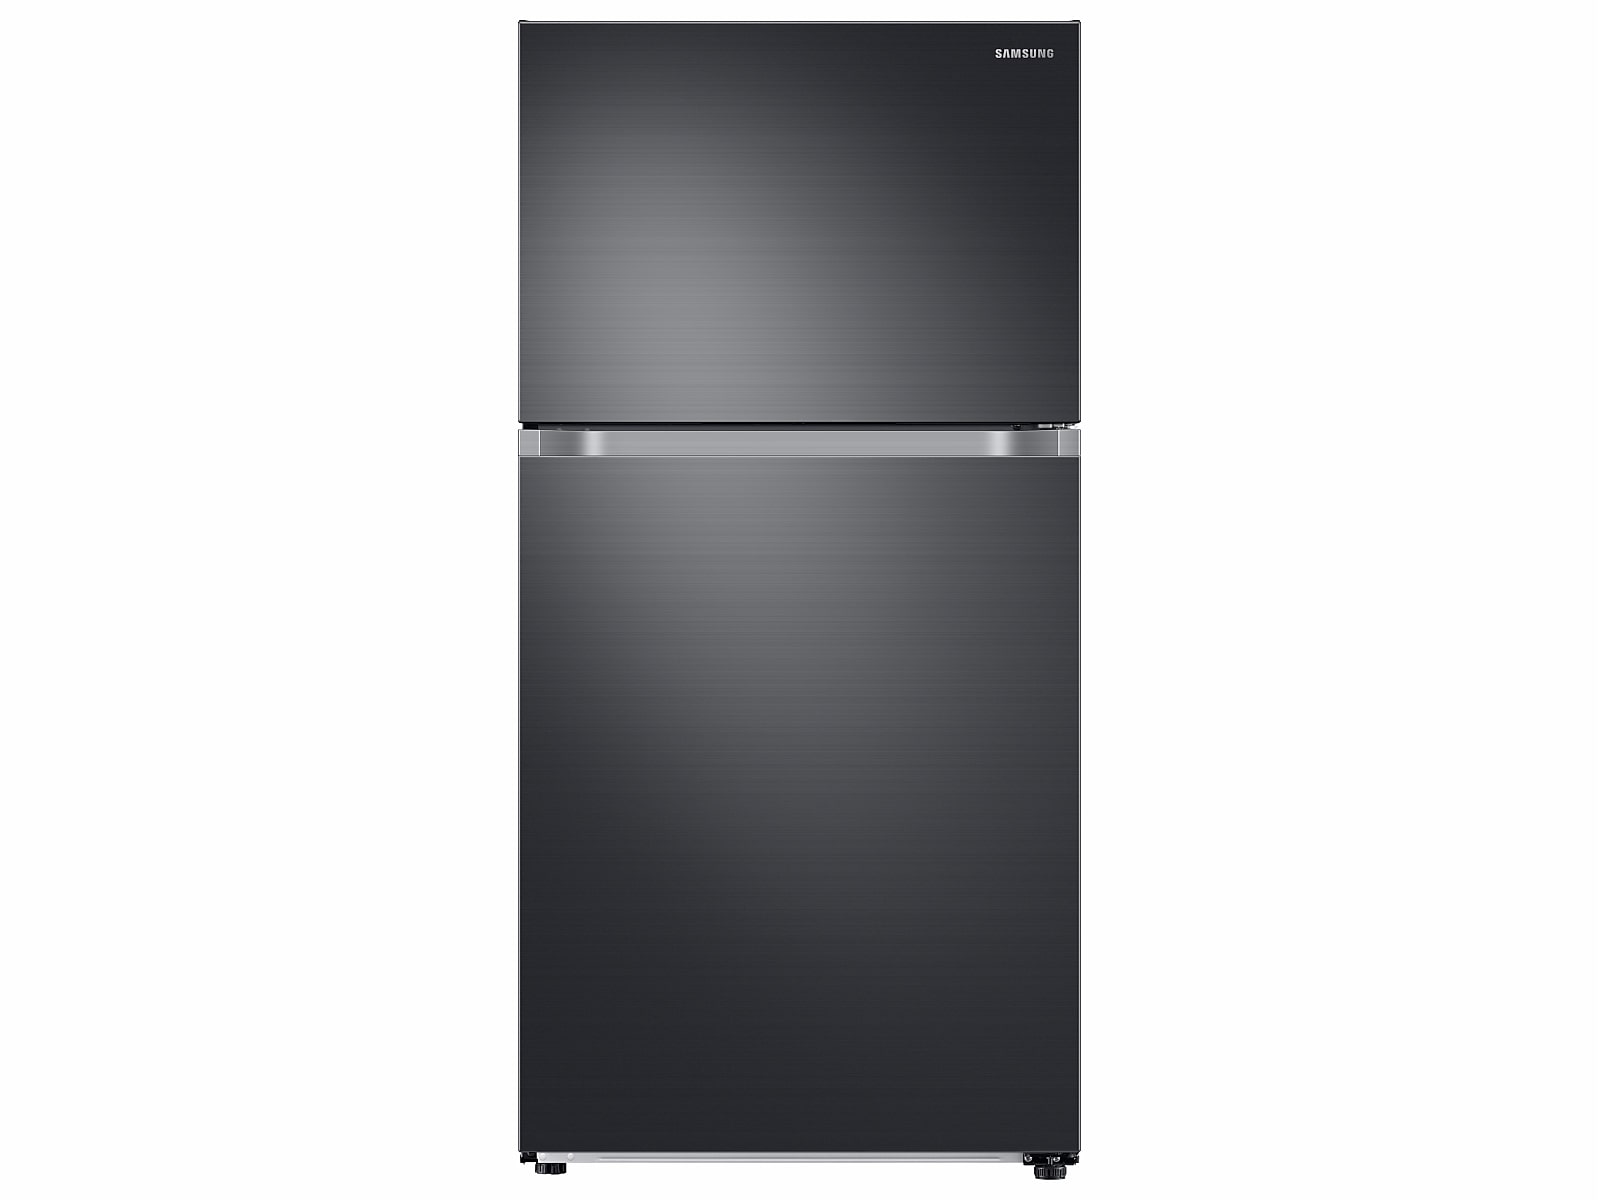 Samsung 21 cu. ft. Top Freezer Refrigerator with FlexZone™ in Black Stainless Steel(RT21M6213SG/AA) photo